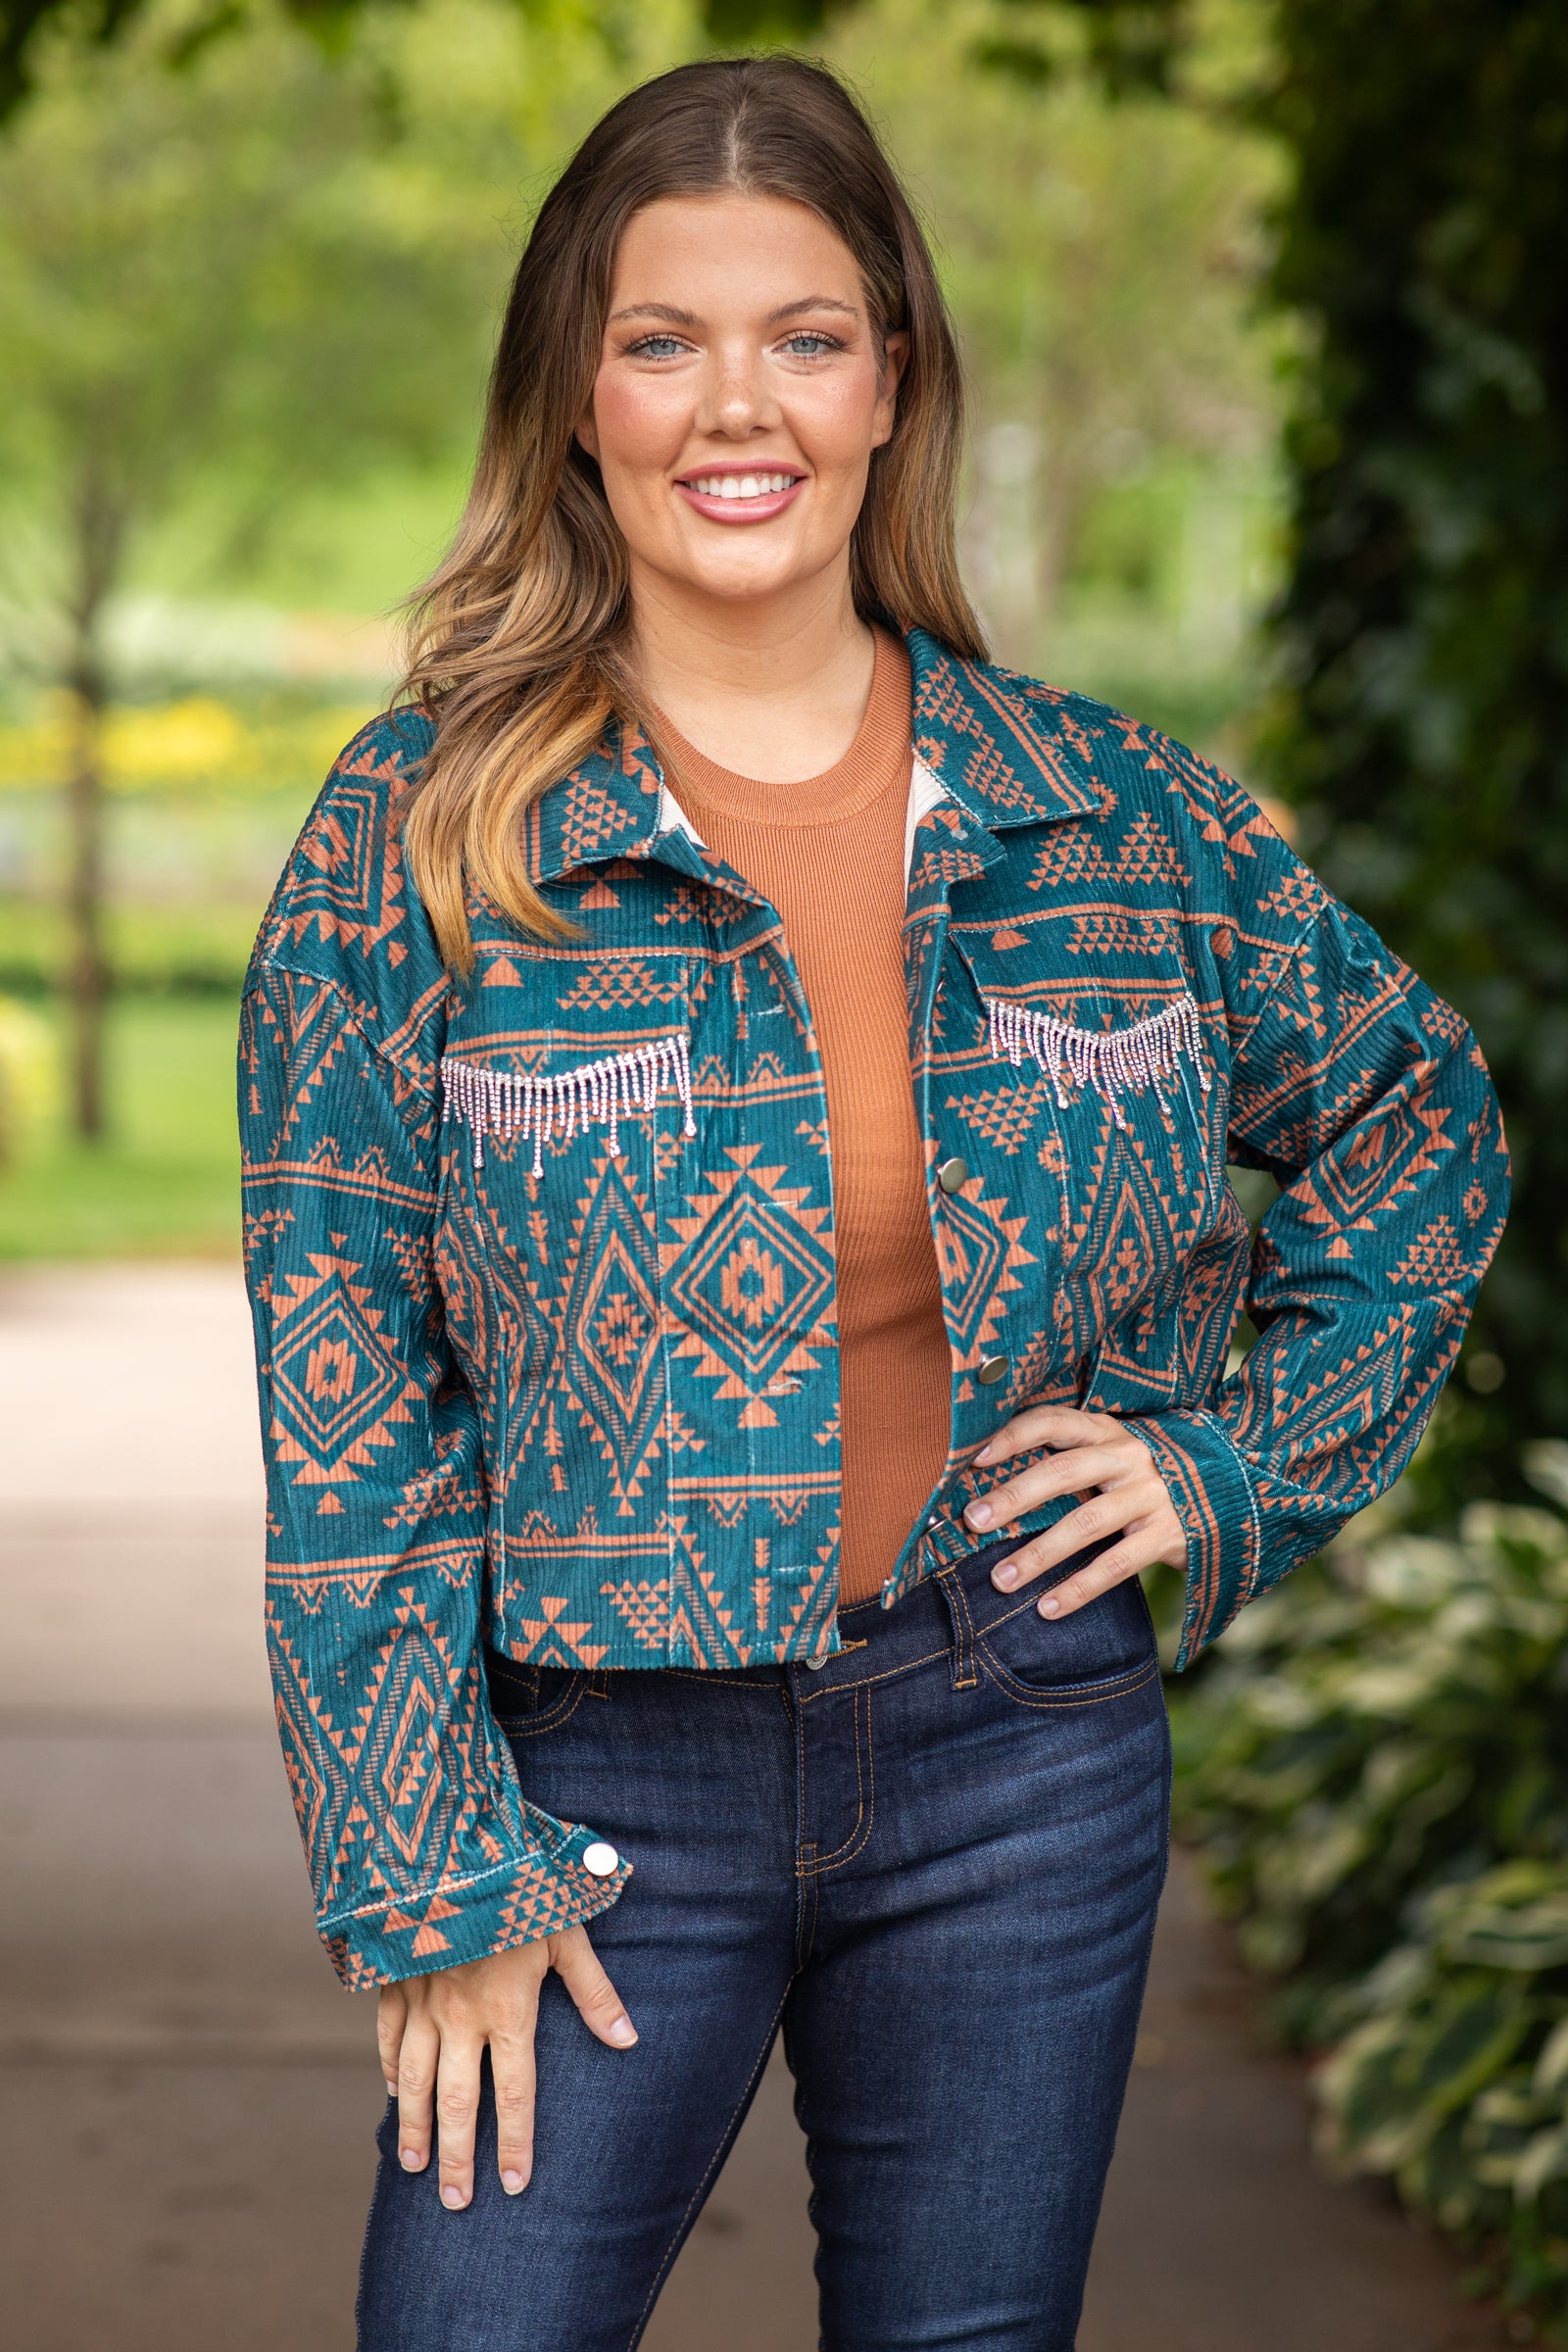 Teal and Cognac Aztec Print Jacket With Fringe